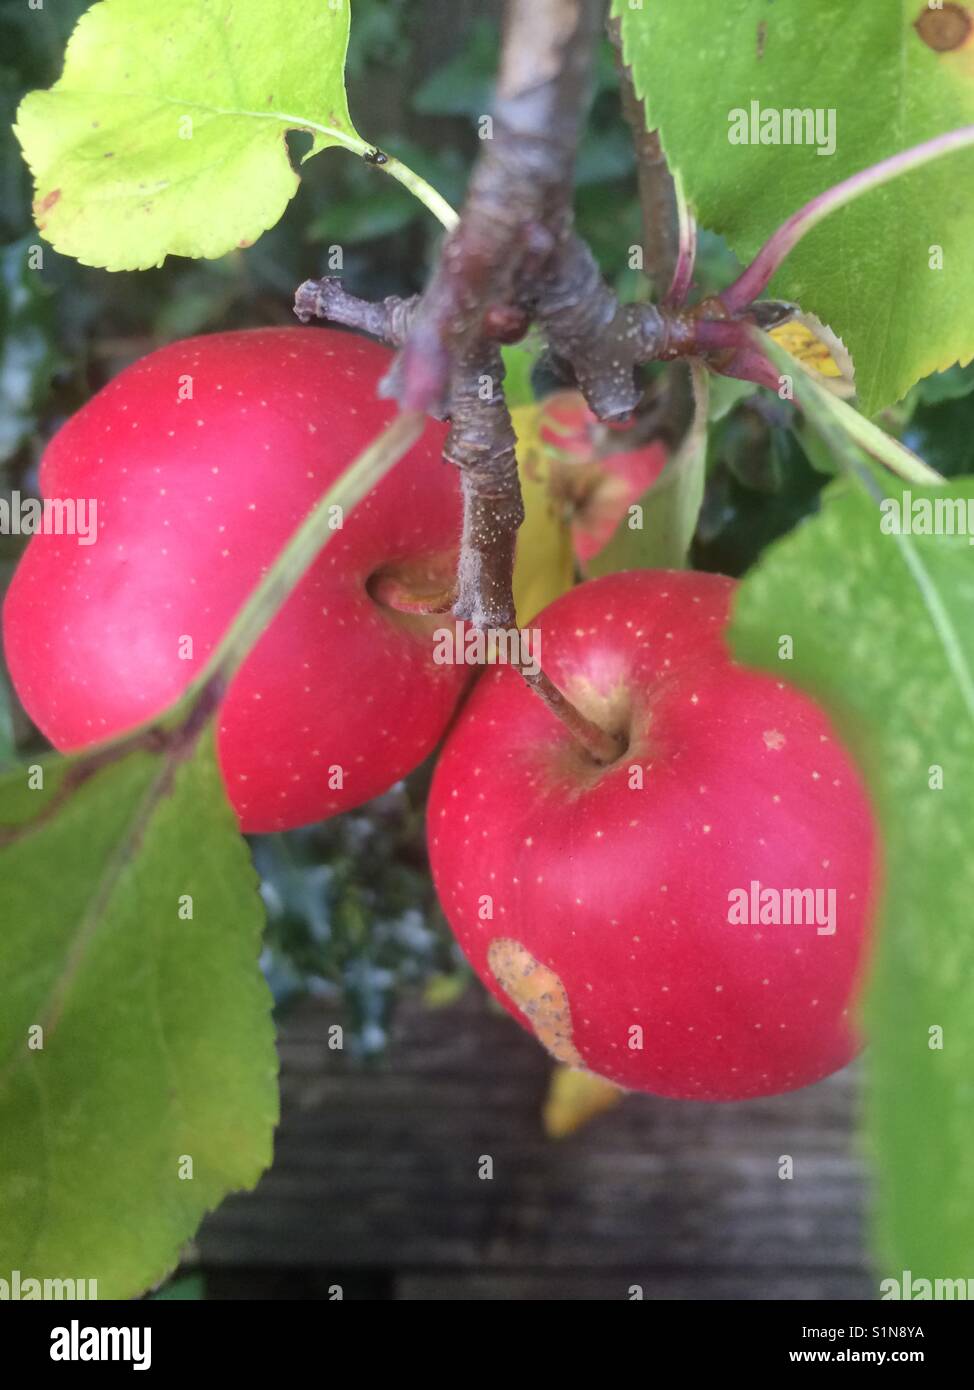 Two apples growing Stock Photo